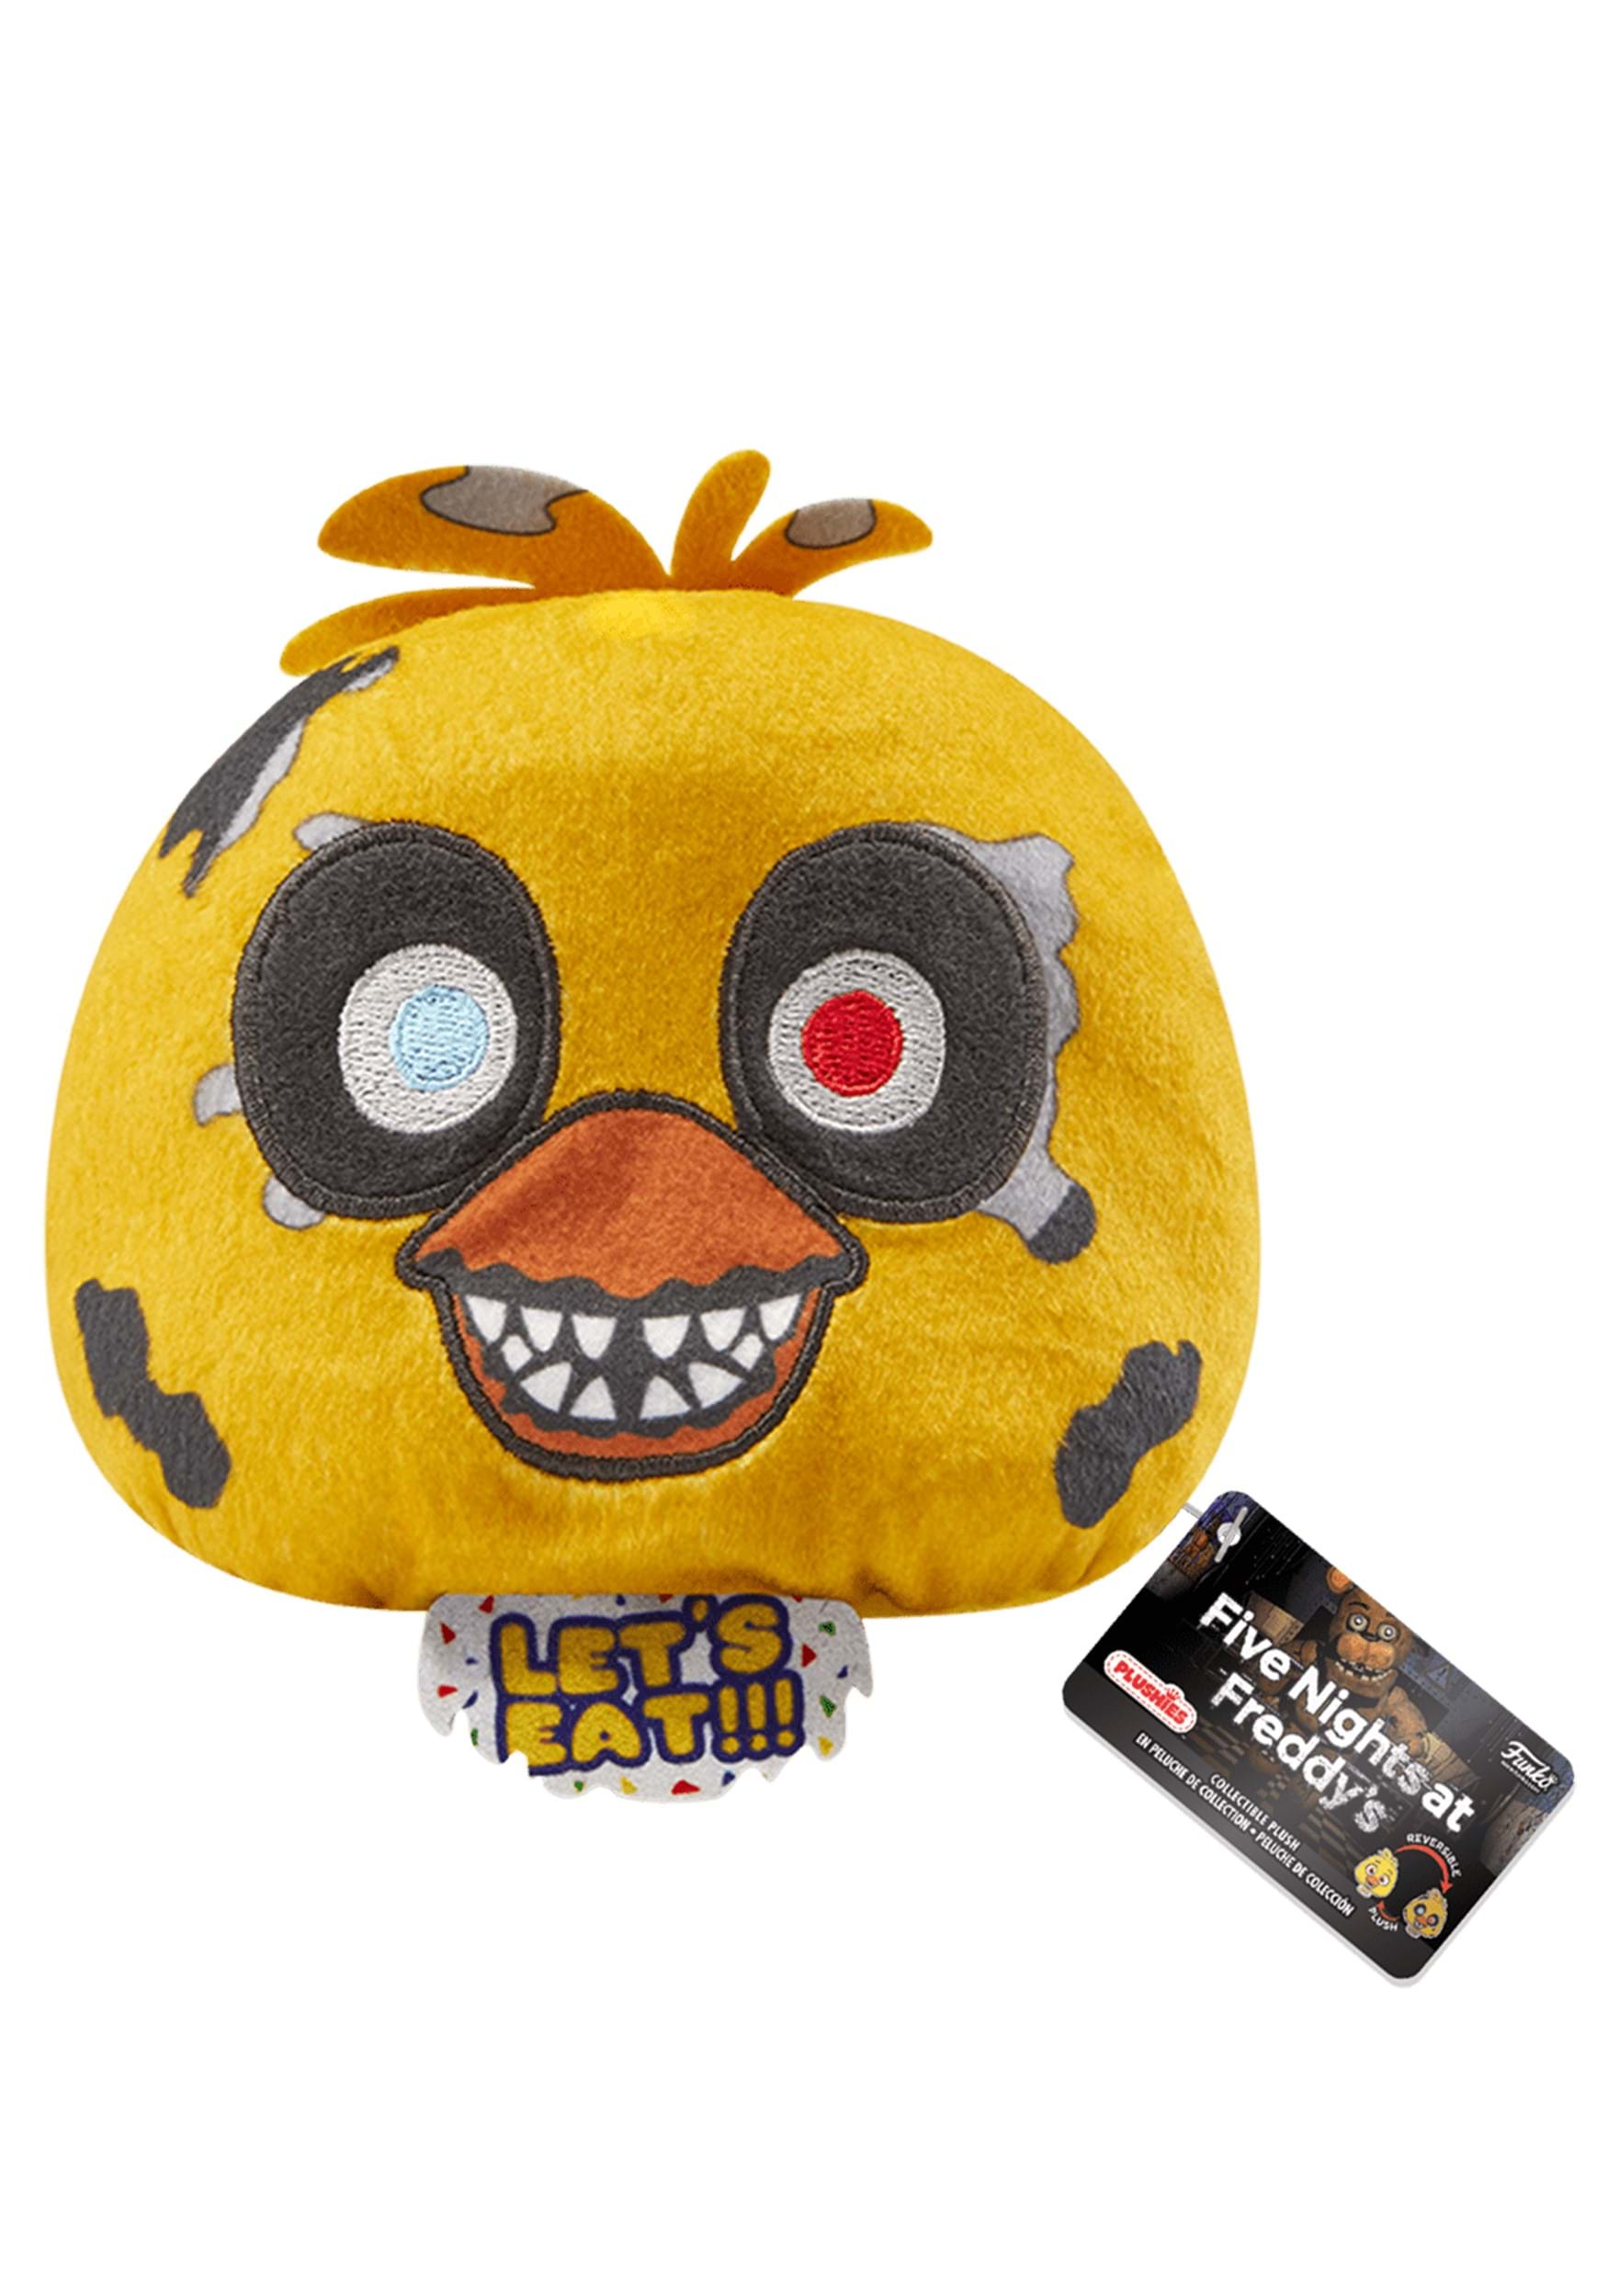 Five Nights At Freddys Plush-Chica the Chicken-Good Stuff Company